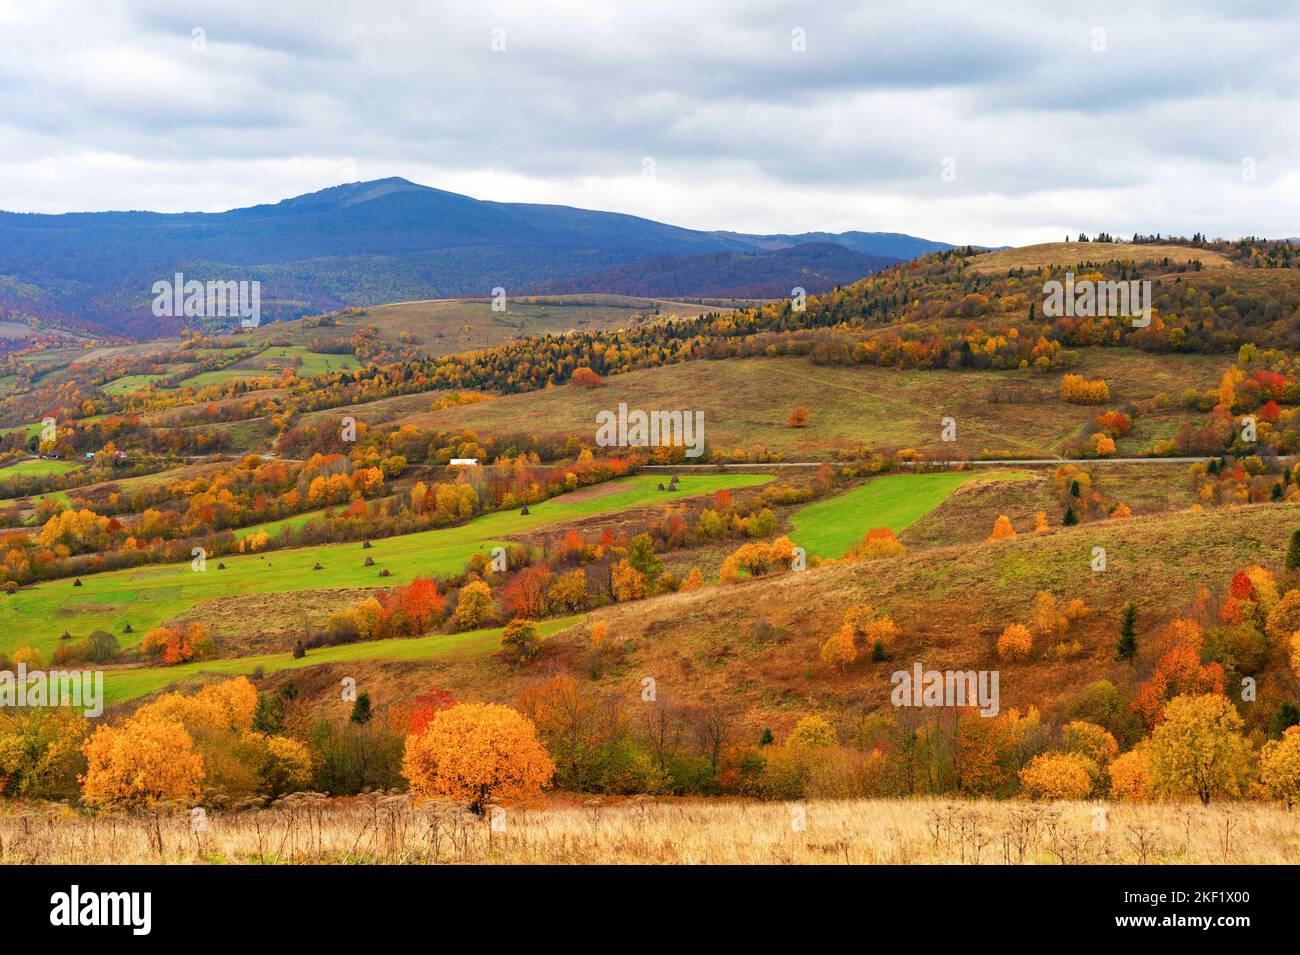 Colorful landscape, trees and fields, mountains in background, autumn scene, Carpathian mountains, Ukraine Stock Photo